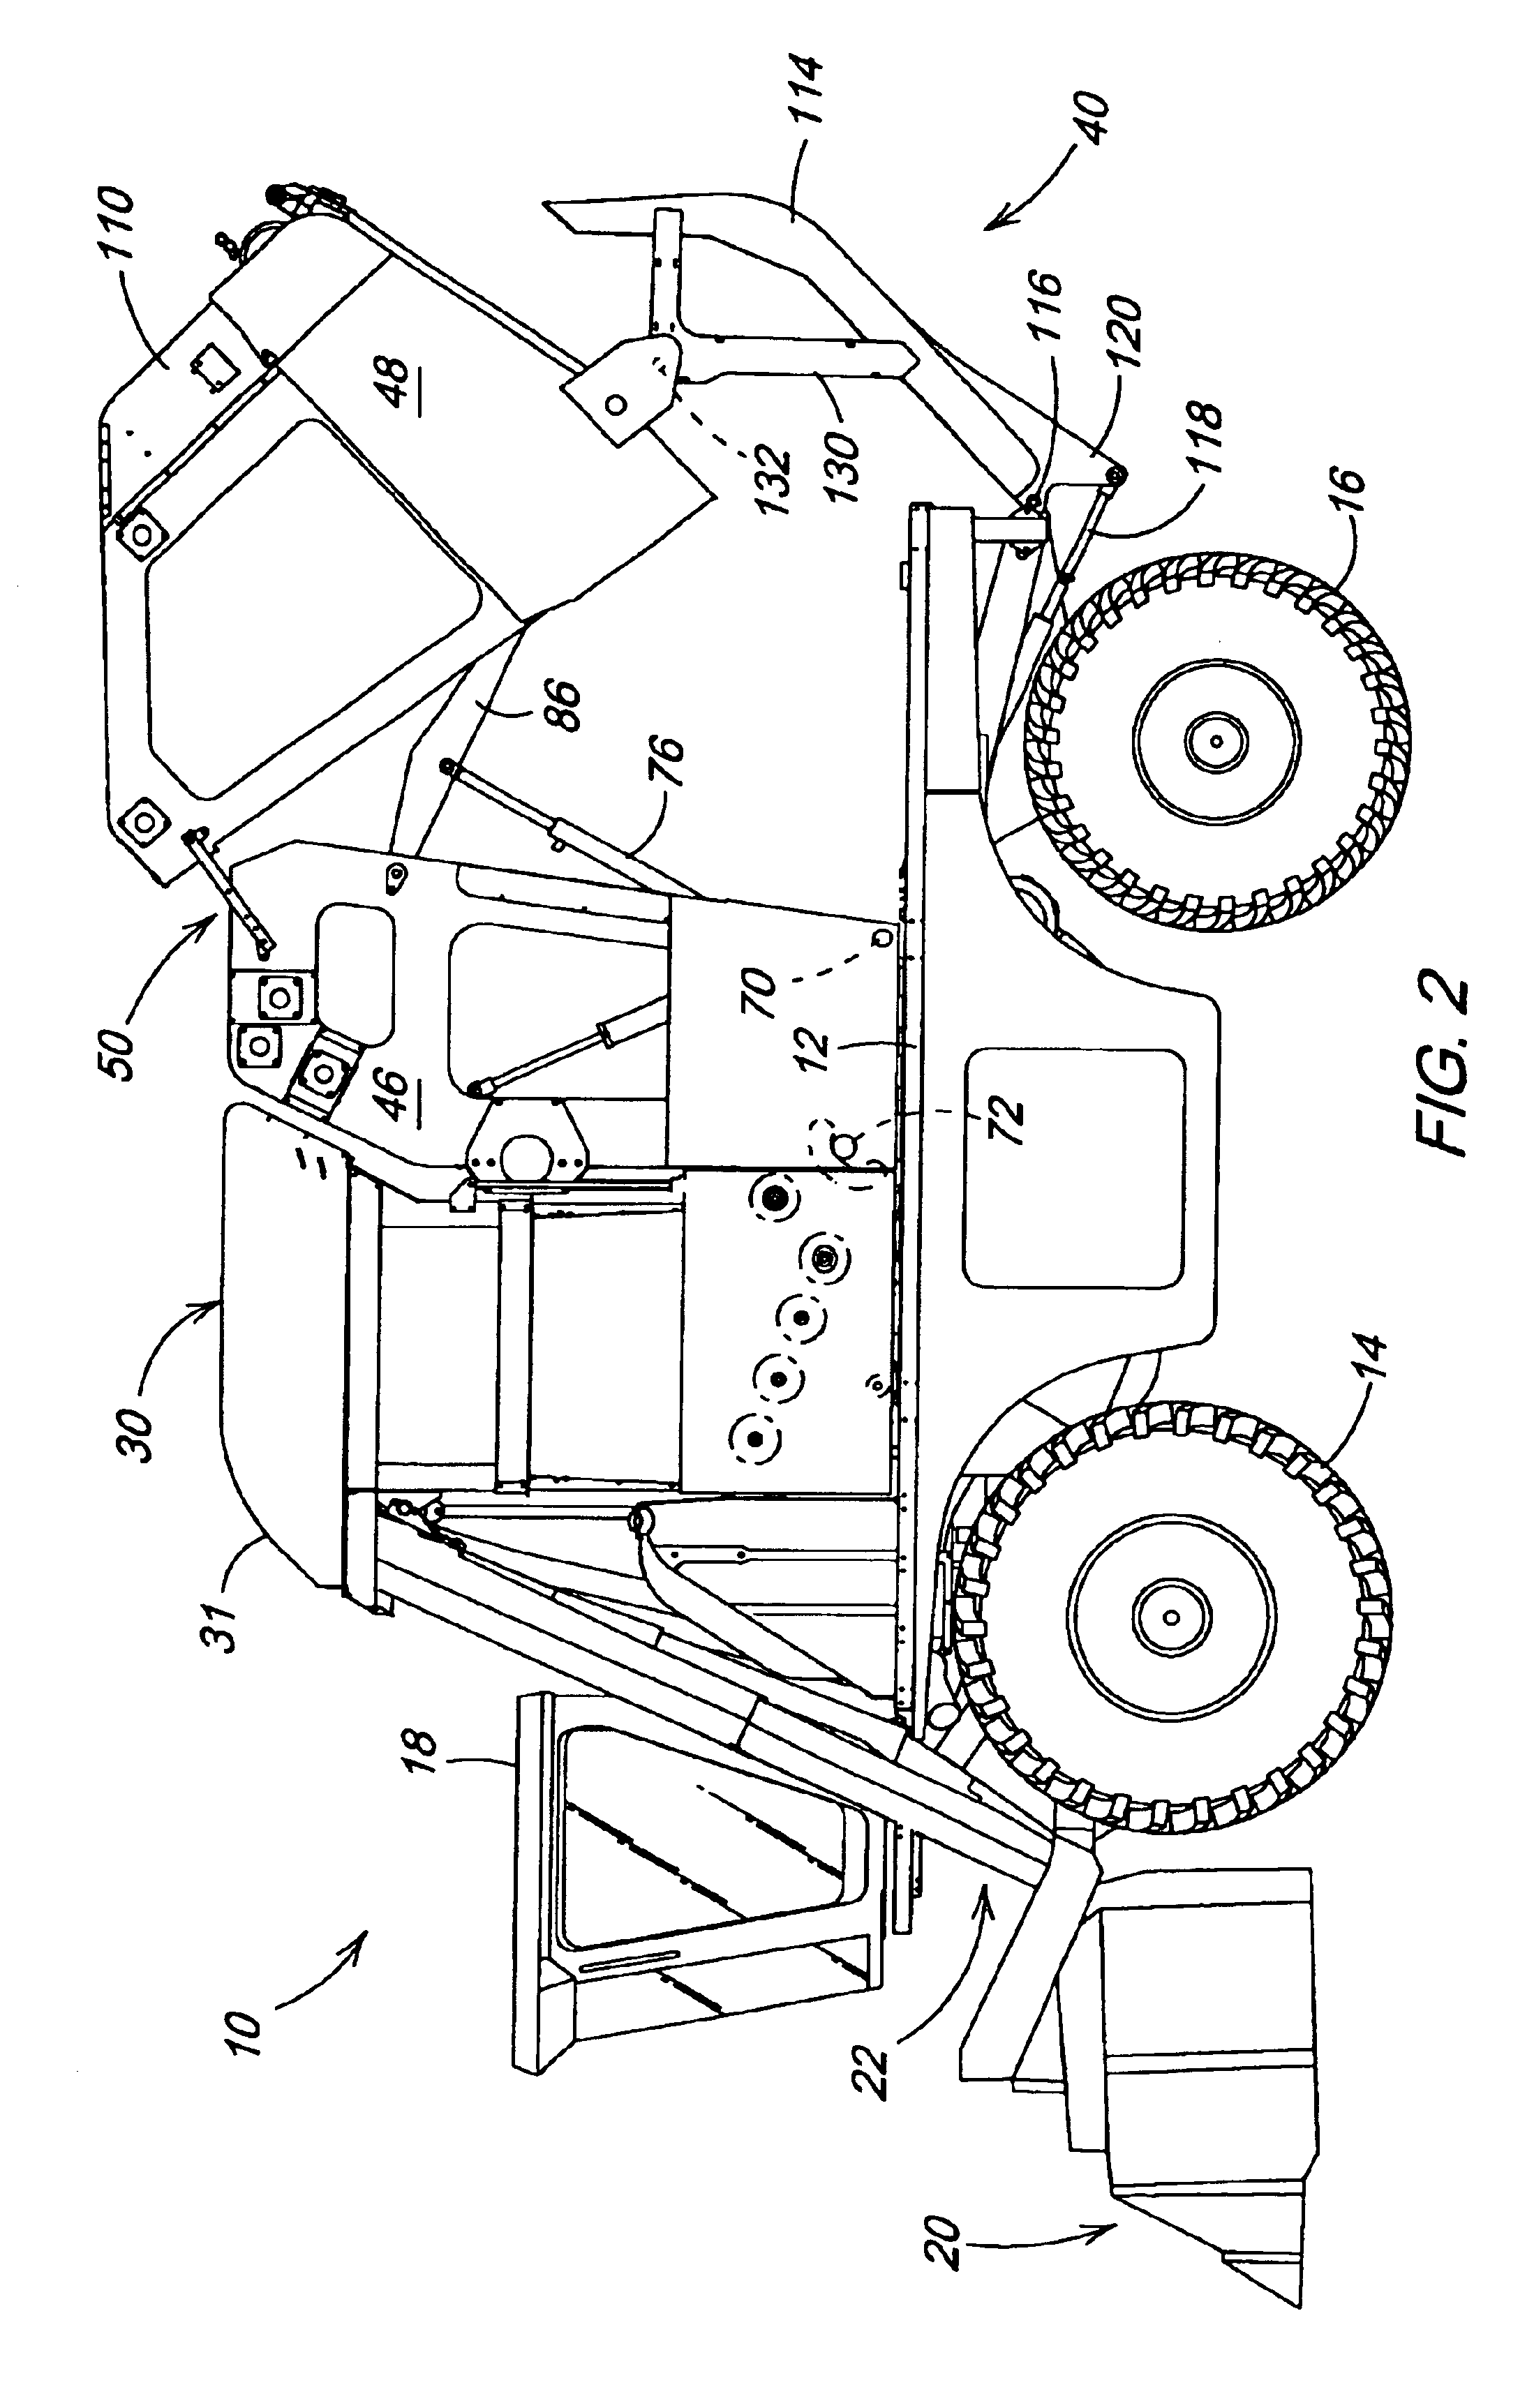 Baler gate linkage and latch structure